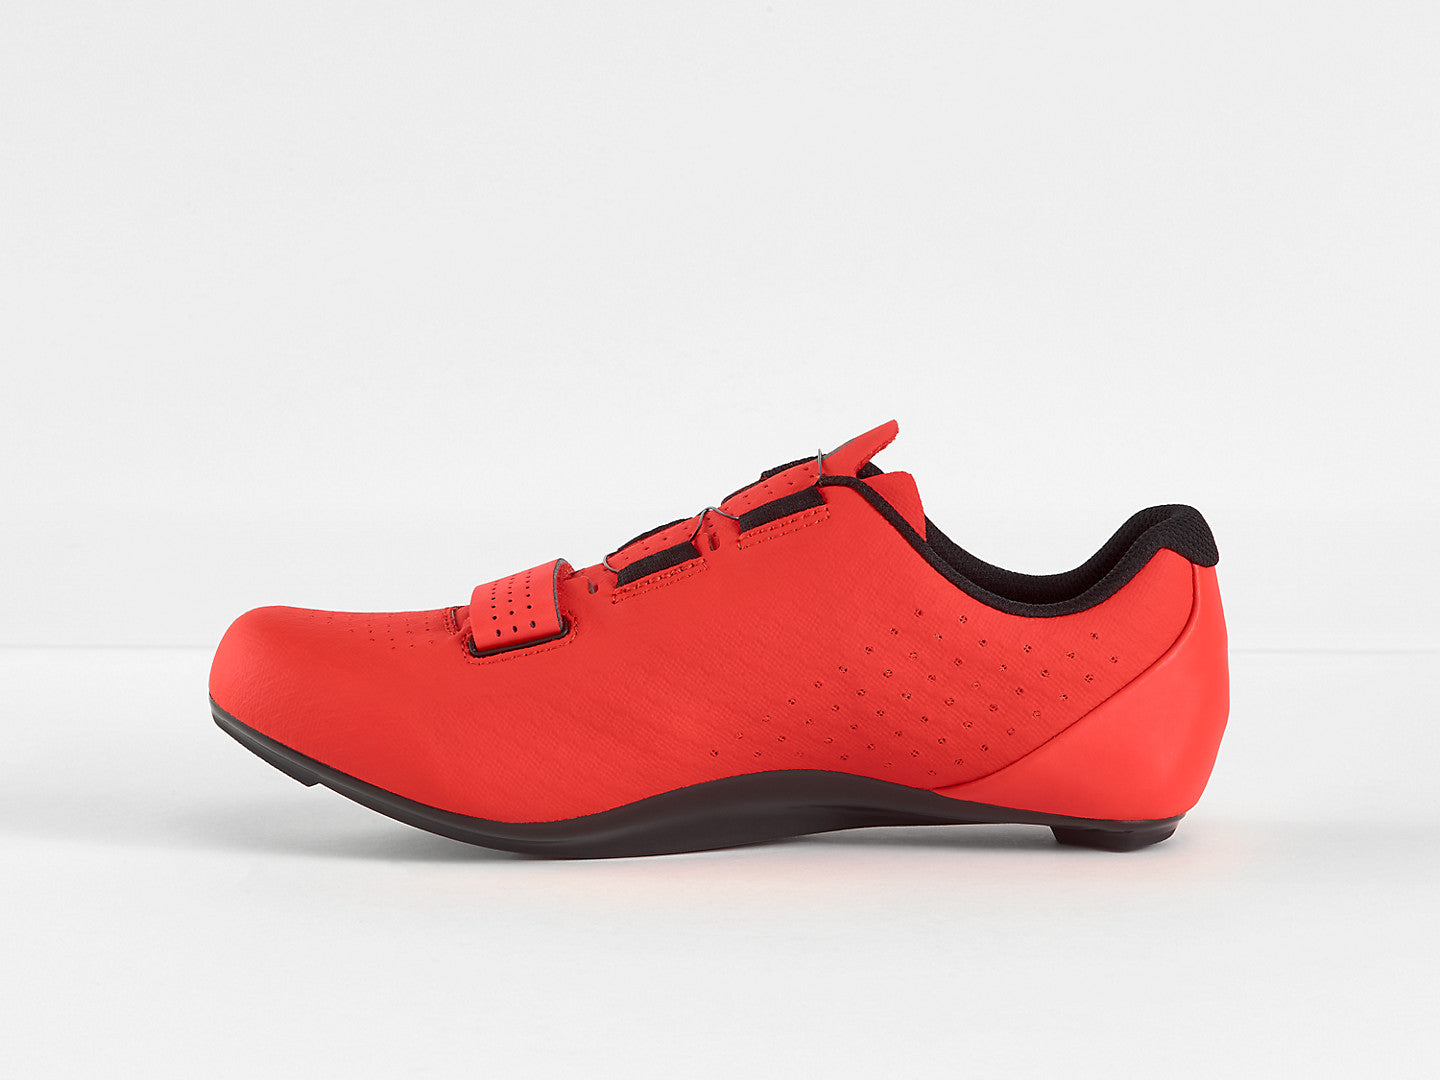 BONTRAGER - CIRCUIT ROAD CYCLING SHOE (SAVE 50% NOW! ENTER CODE BONTRAGER50 AT CHECK OUT)